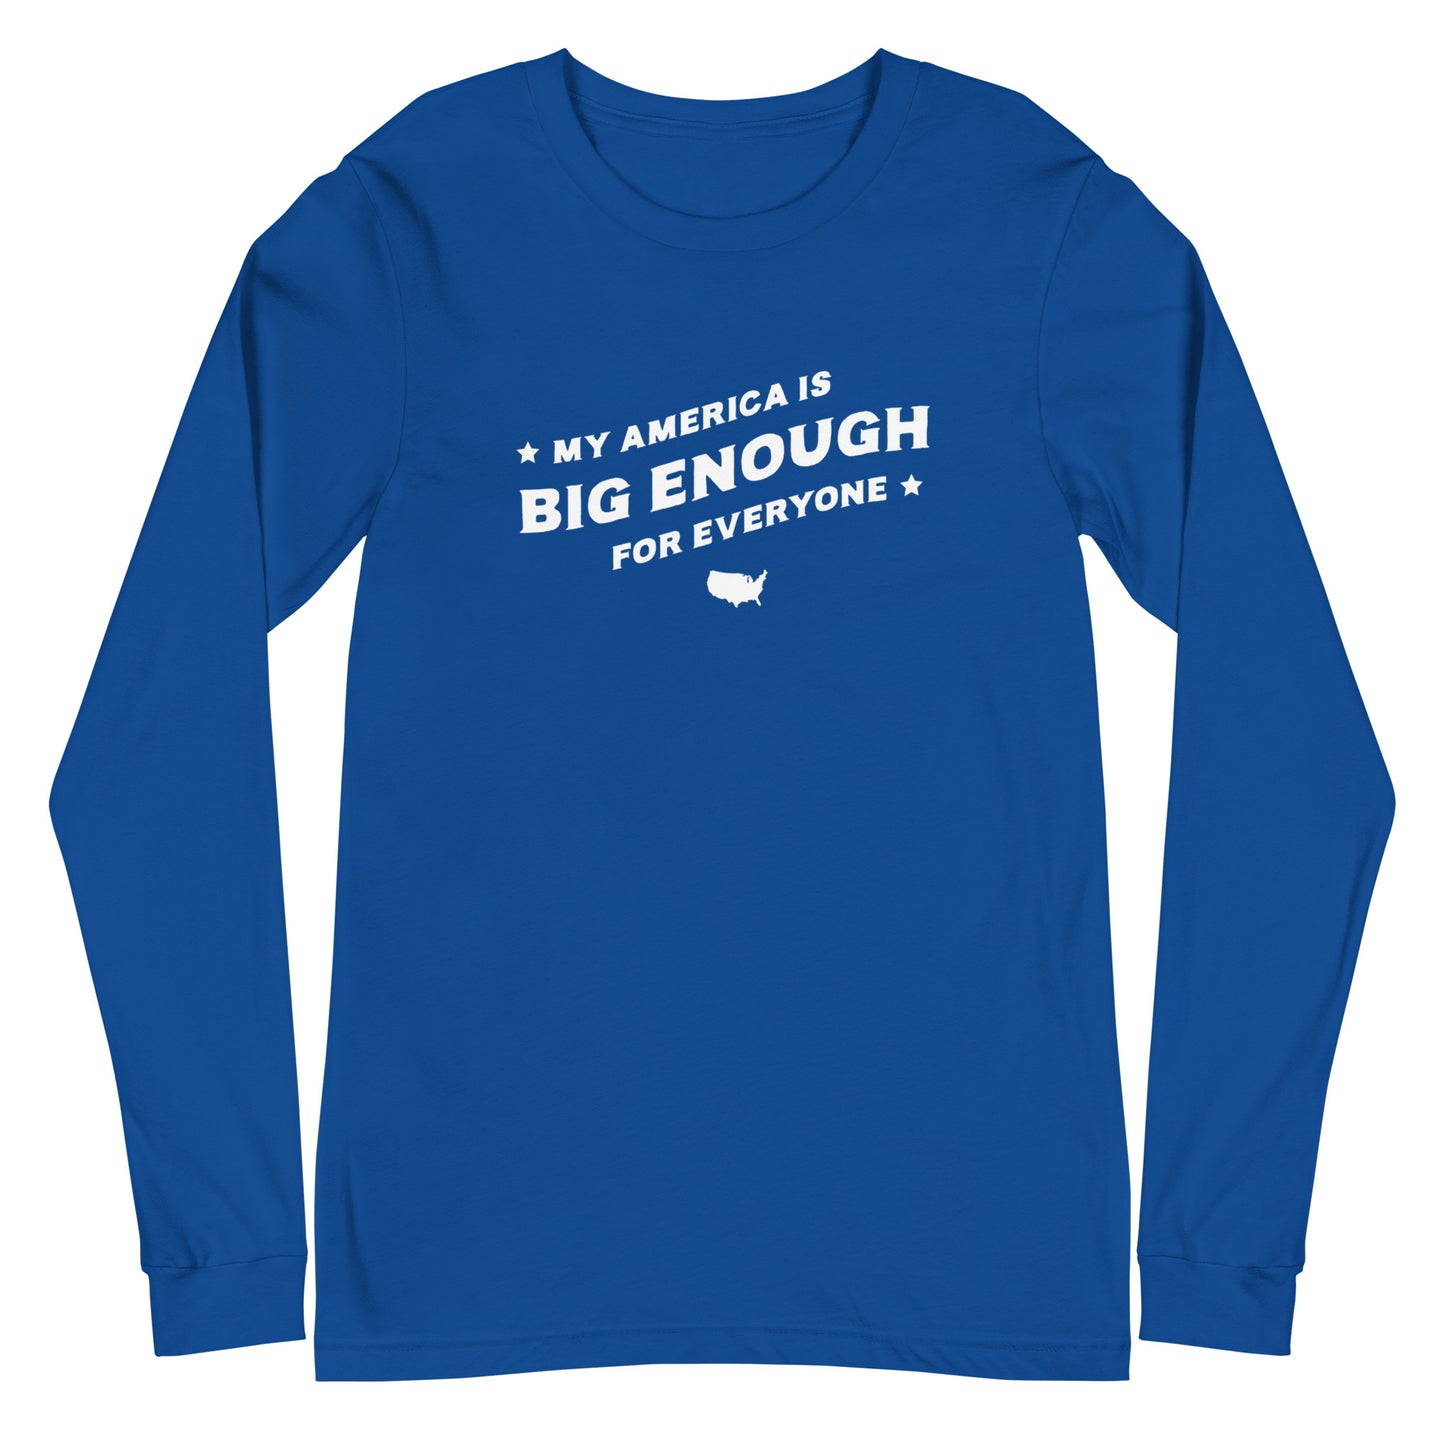 My America is Big Enough for Everyone - Unisex Long Sleeve Shirt